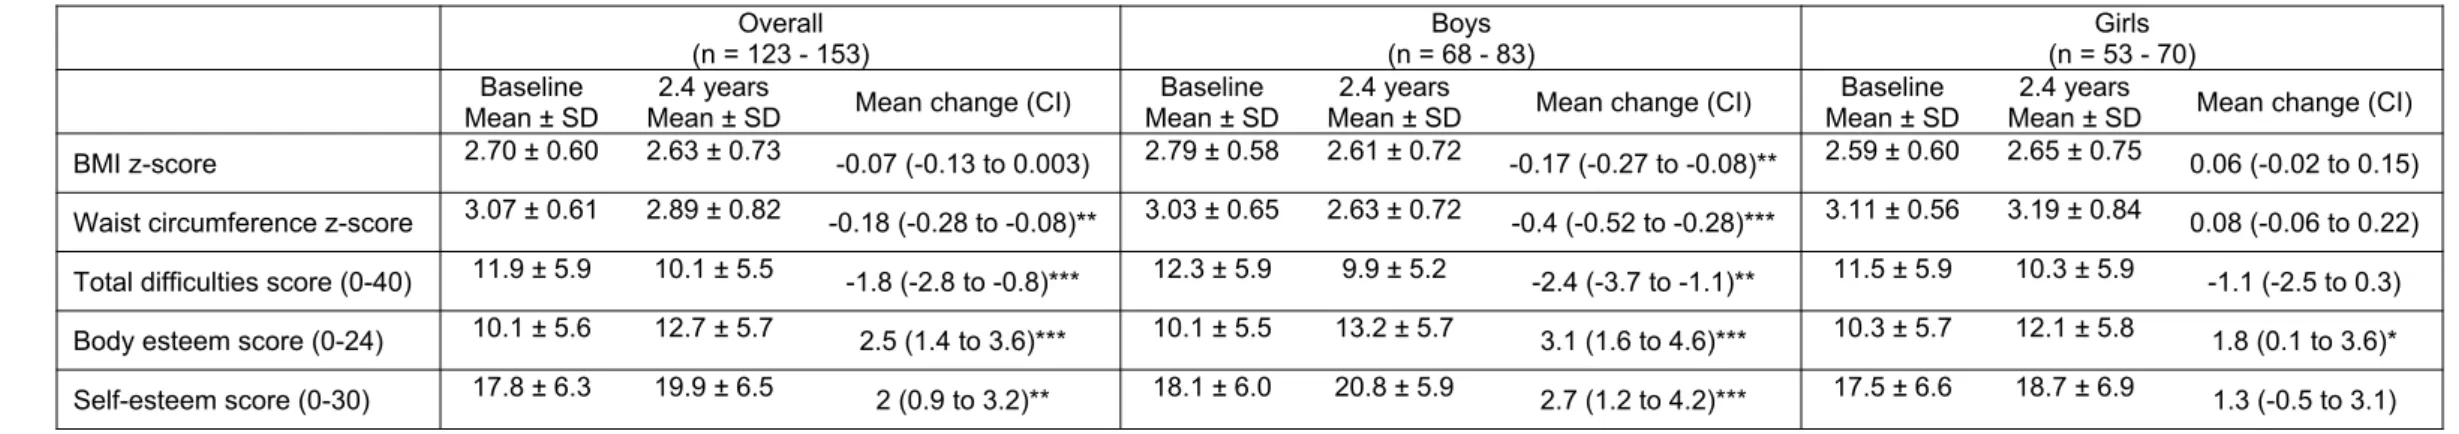 Table 2: Within-subject changes in outcome variables 2.4 years from baseline Overall (n = 123 - 153) Boys (n = 68 - 83) Girls (n = 53 - 70) Baseline Mean ± SD 2.4 years